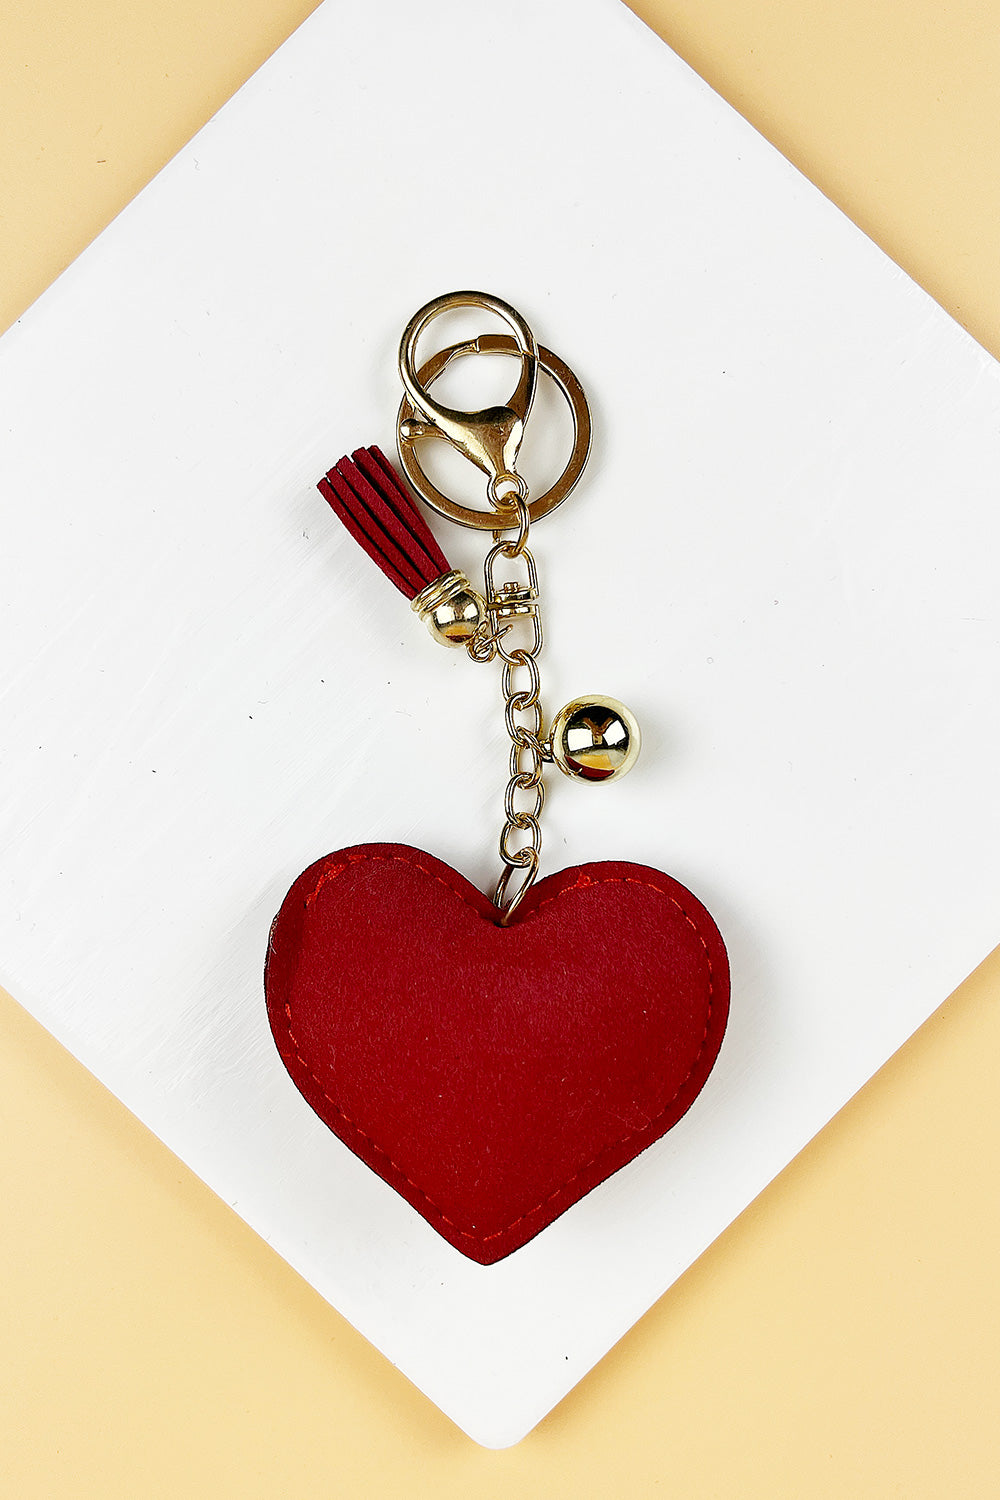 Heart Snap Clip Key Chain (3 pieces)